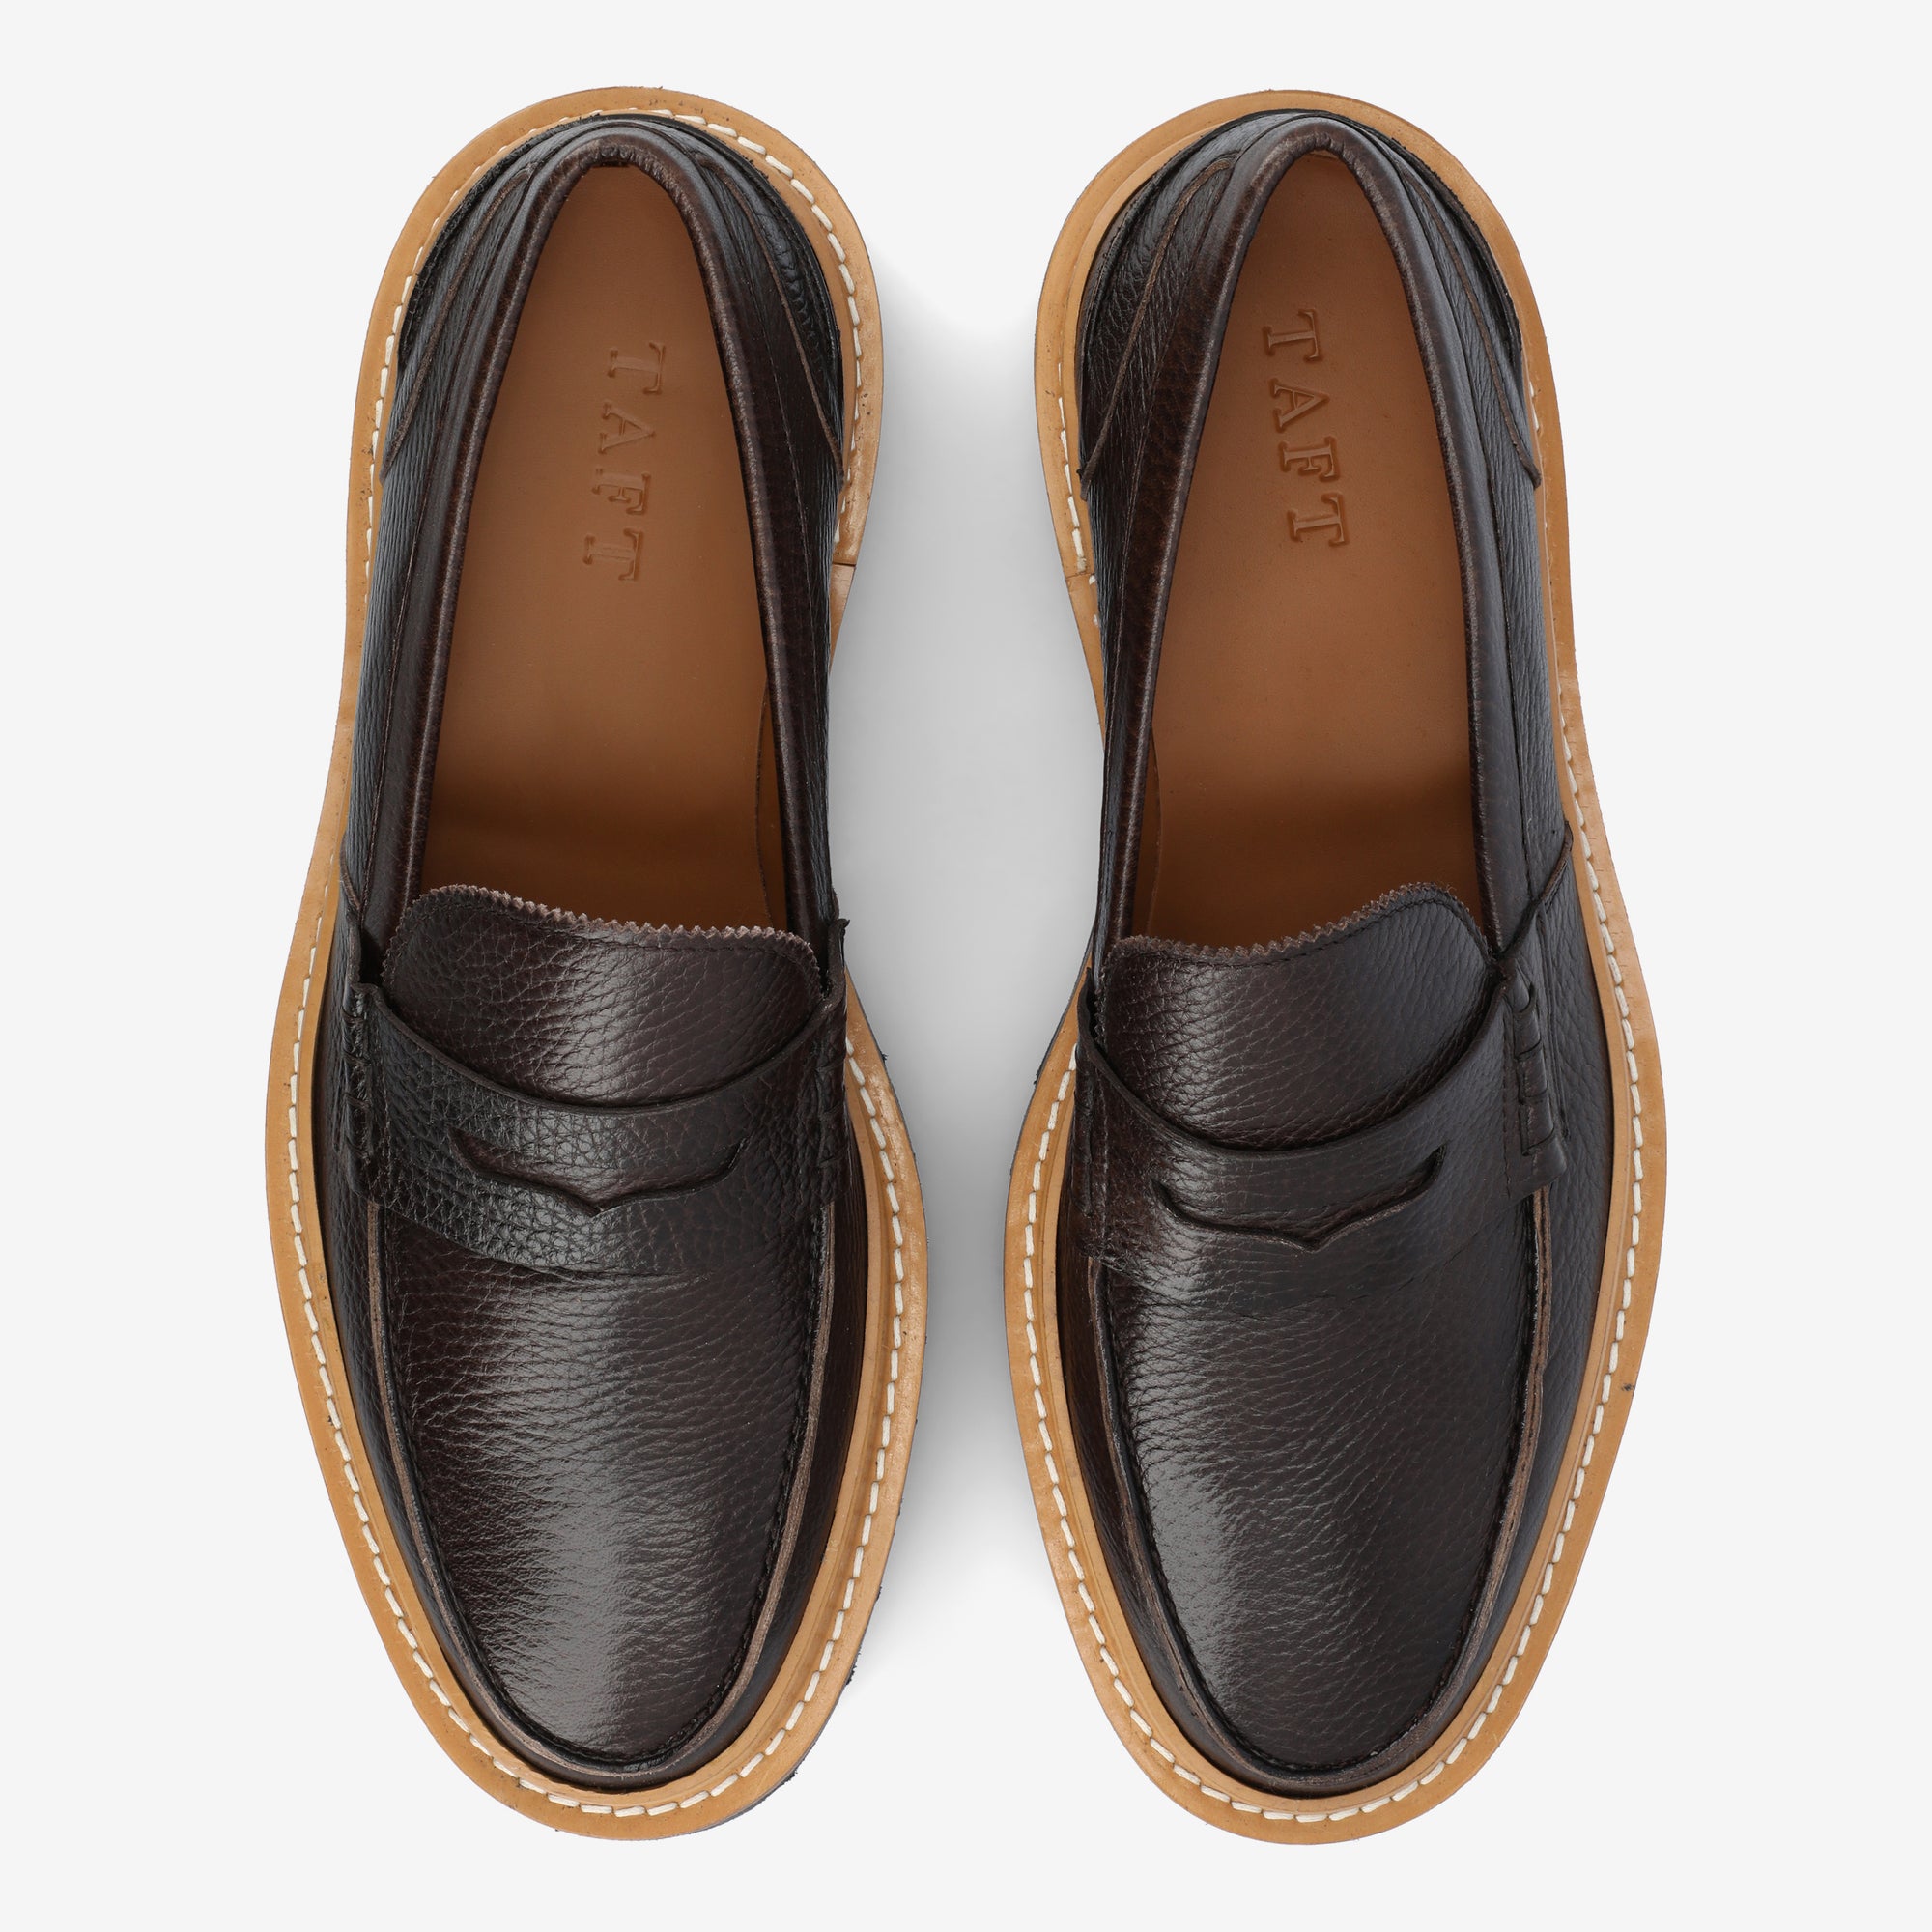 The Country Loafer in Coffee